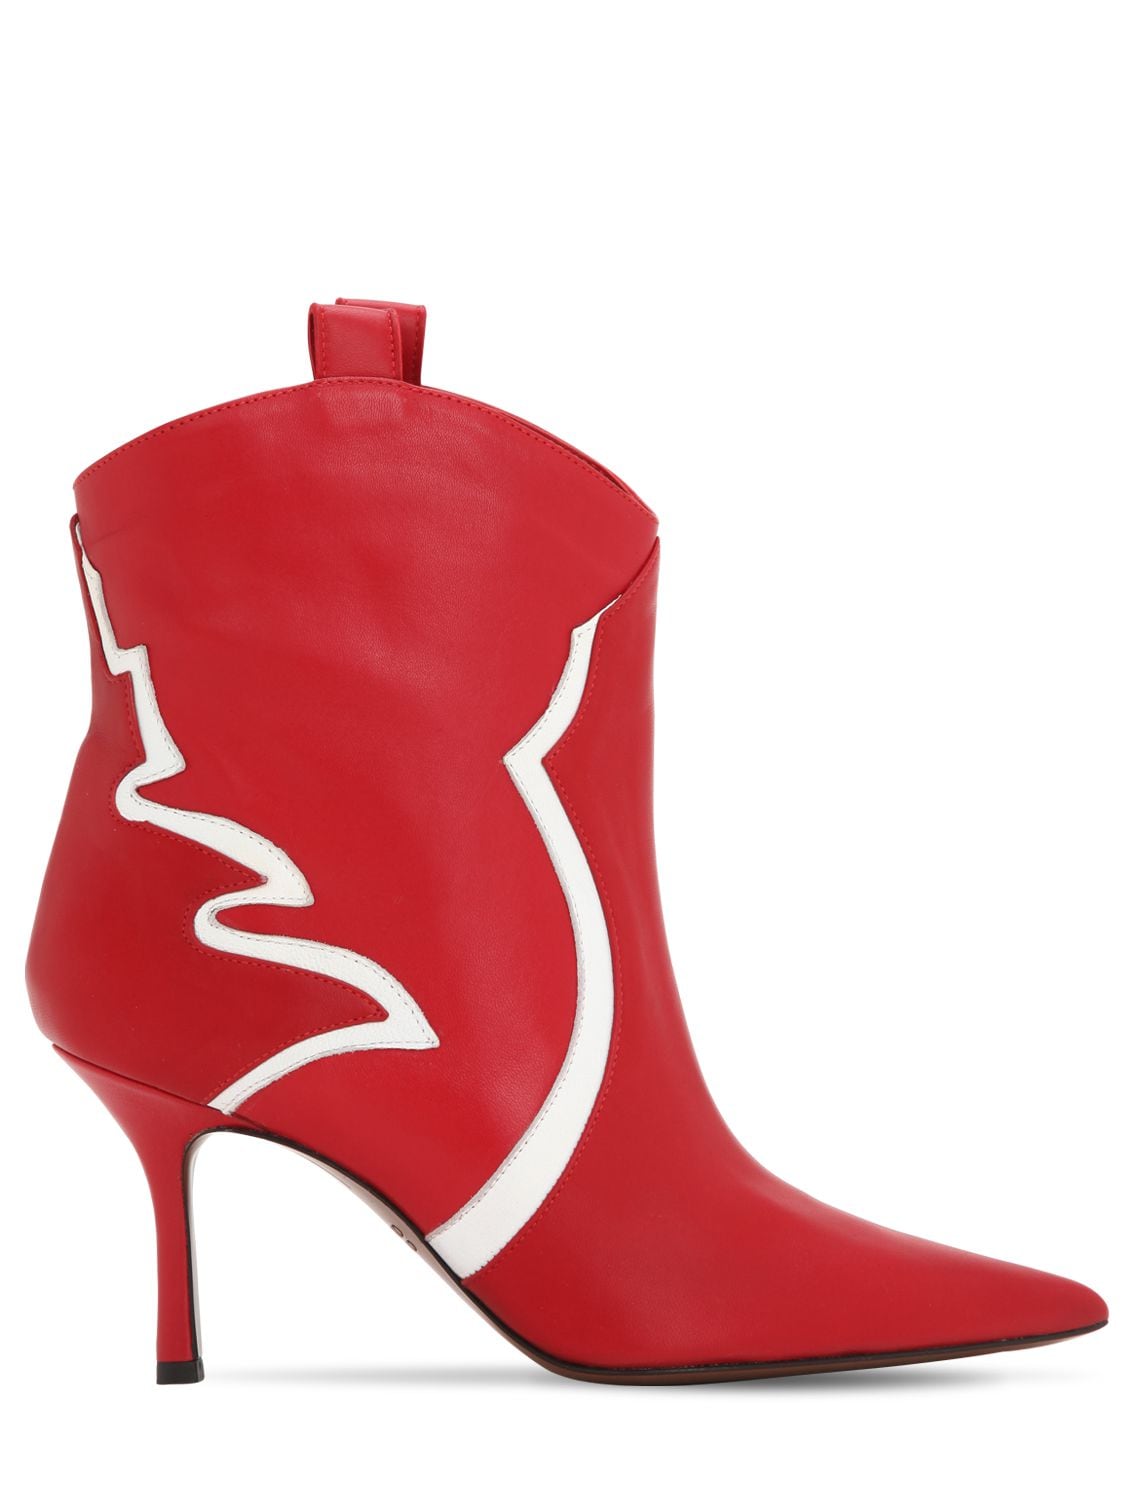 Around The Brand 70mm Leather Ankle Boots In Red,white